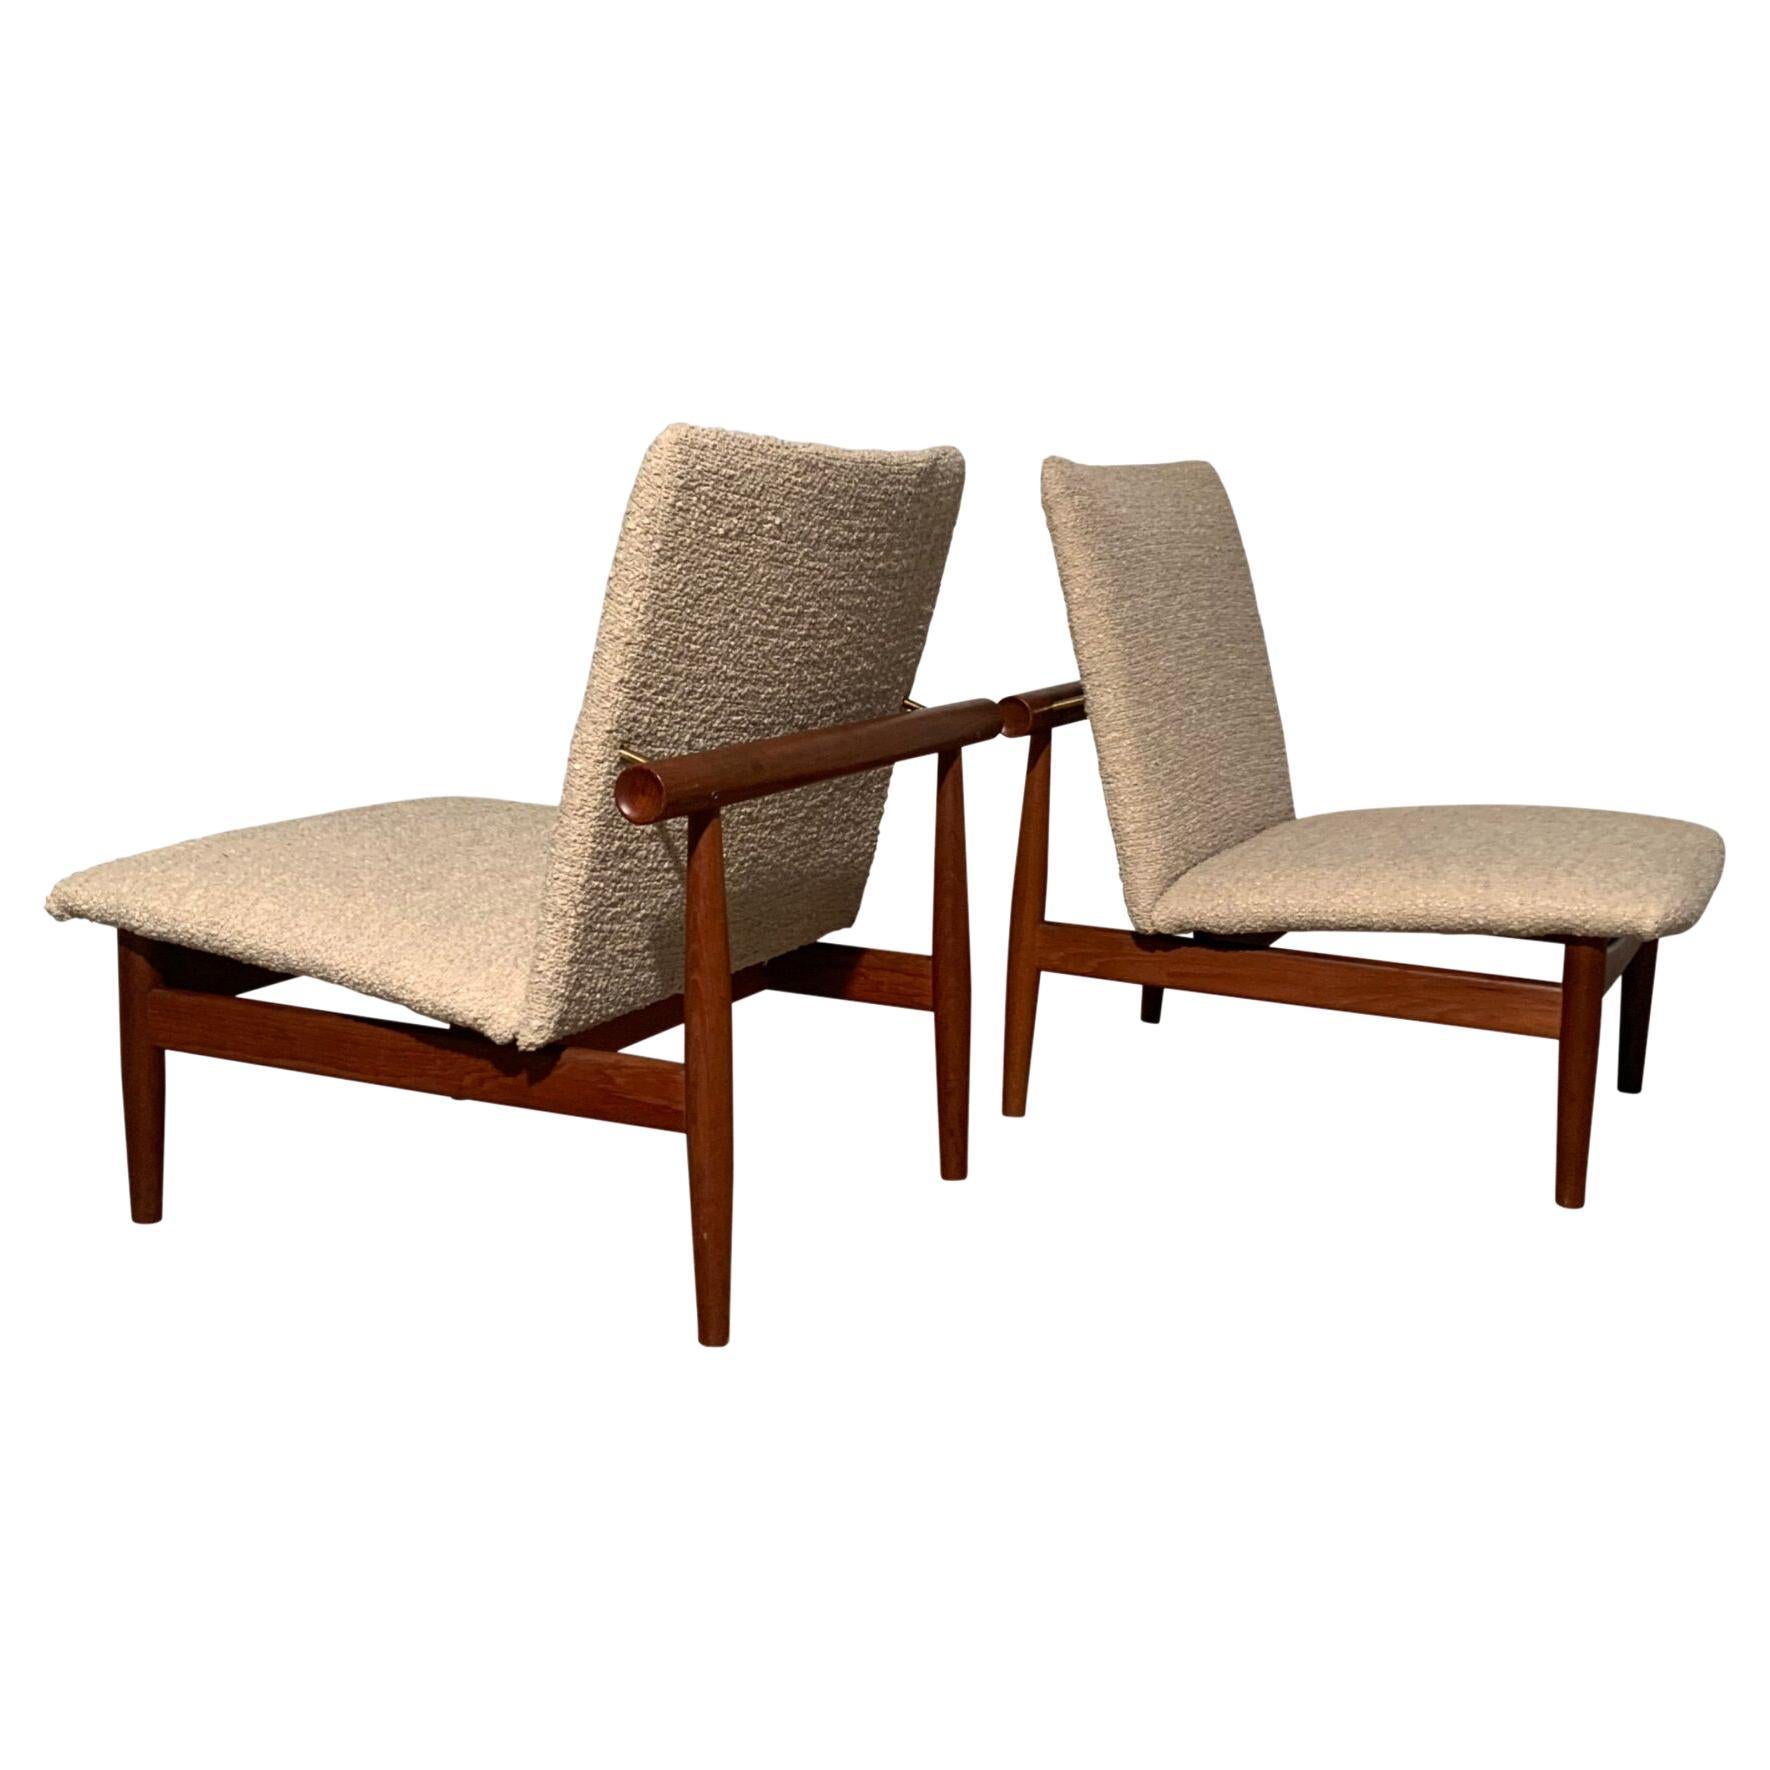 Pair of Finn Juhl Japan Lounge Chairs in Teak and Bouclé Fabric for France & Son